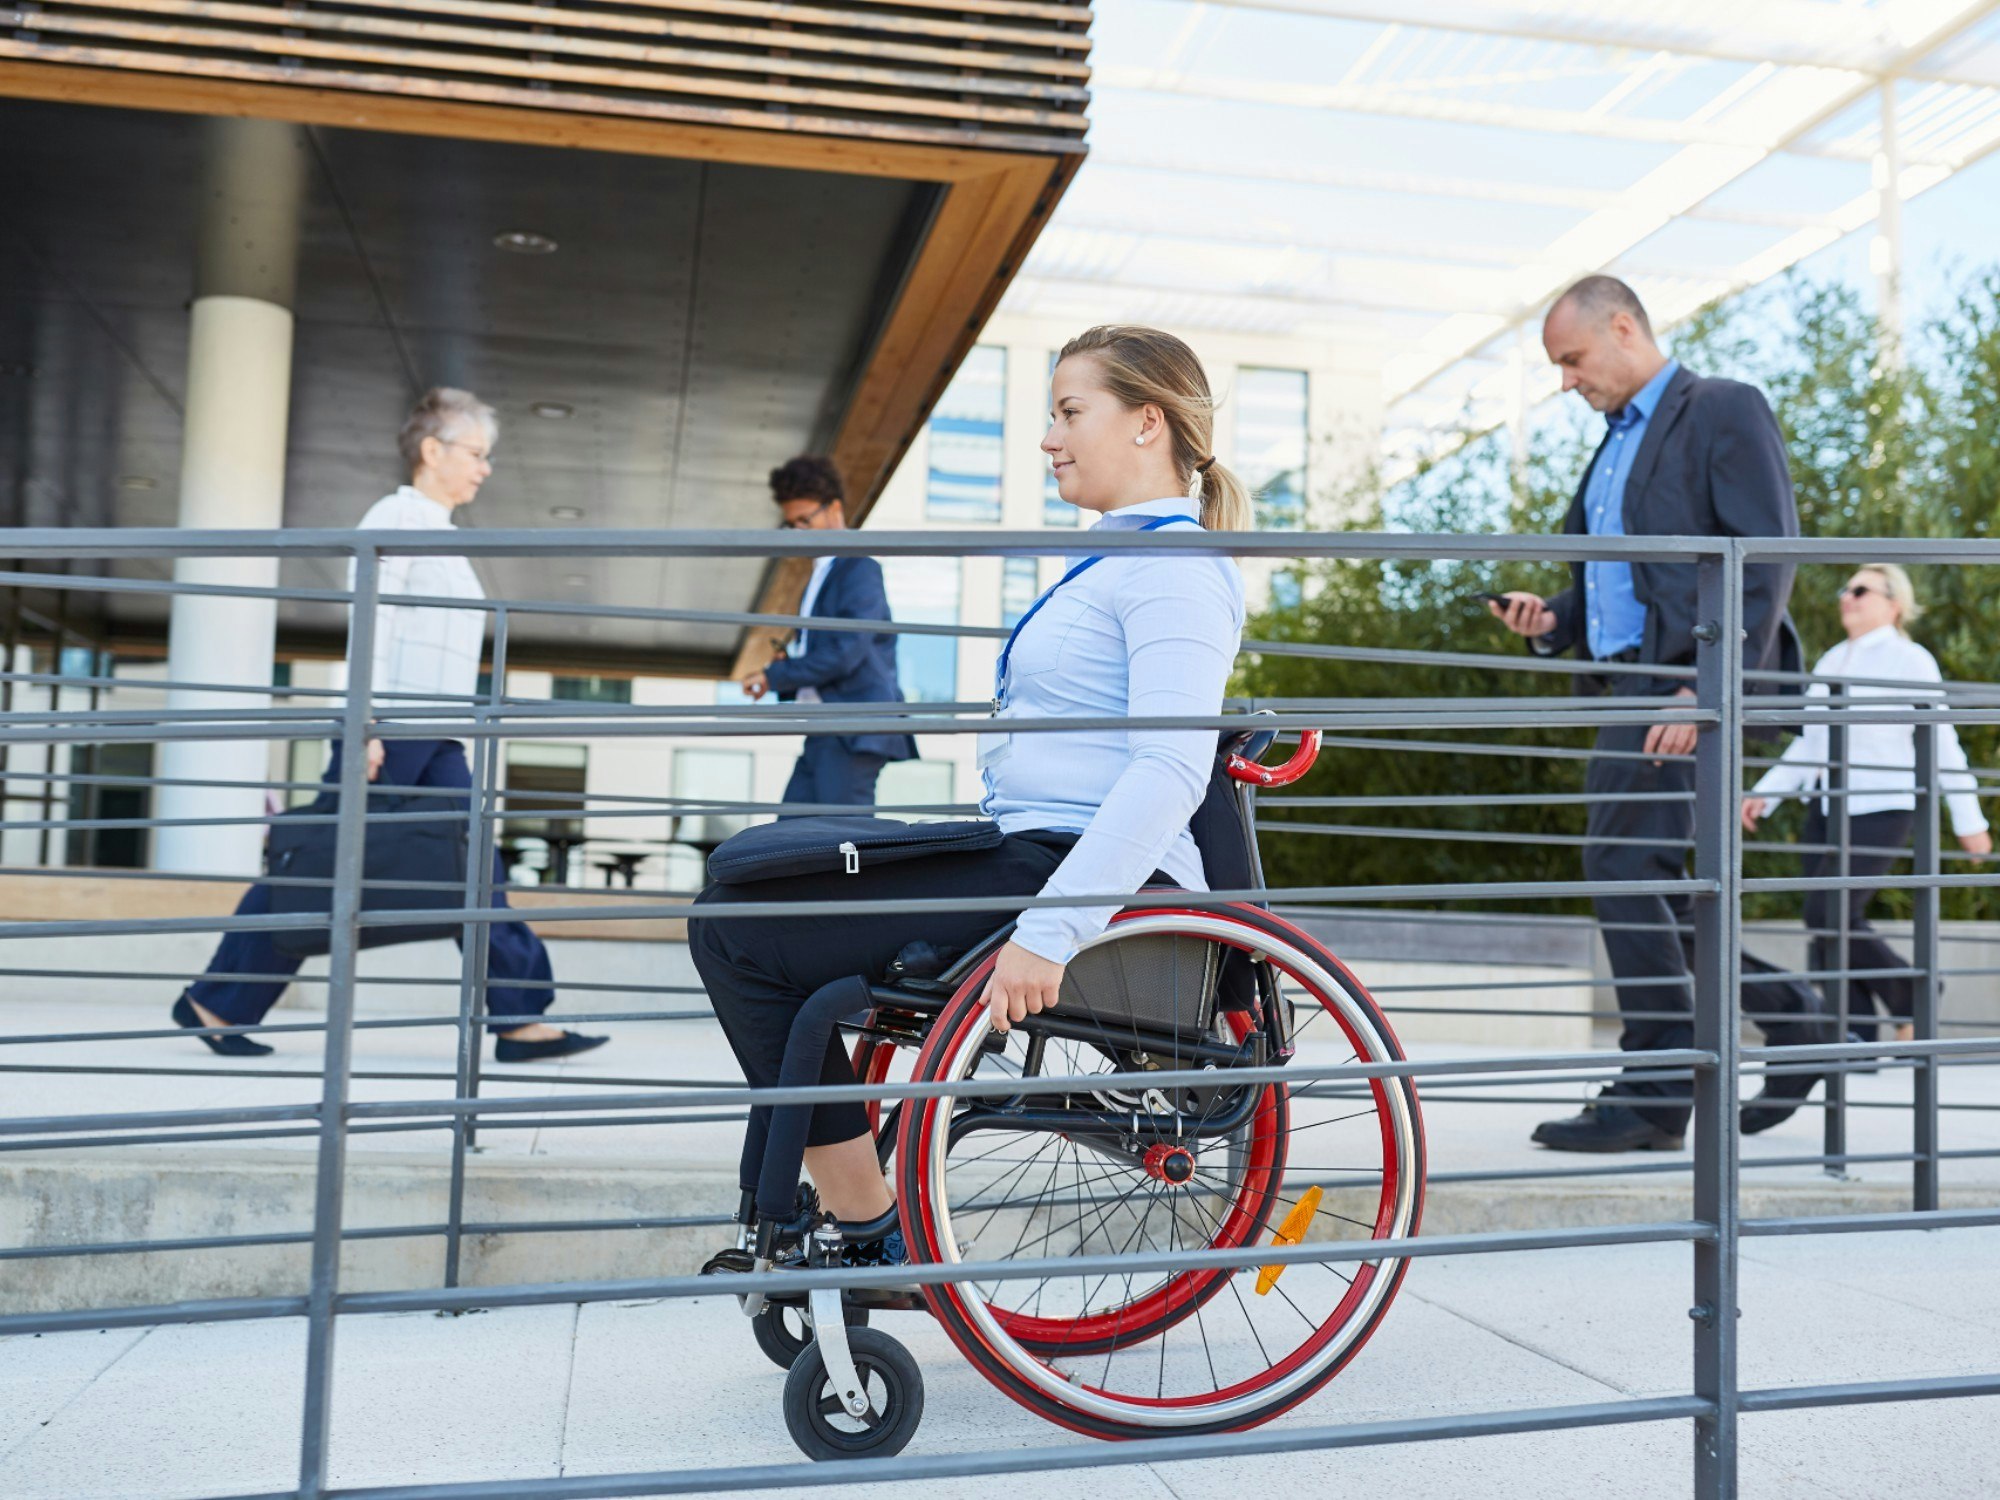 <p>About 20,000 Australians live with restricted mobility due to a spinal cord injury but many still want to attend events or travel. [Source: Shutterstock]</p>
